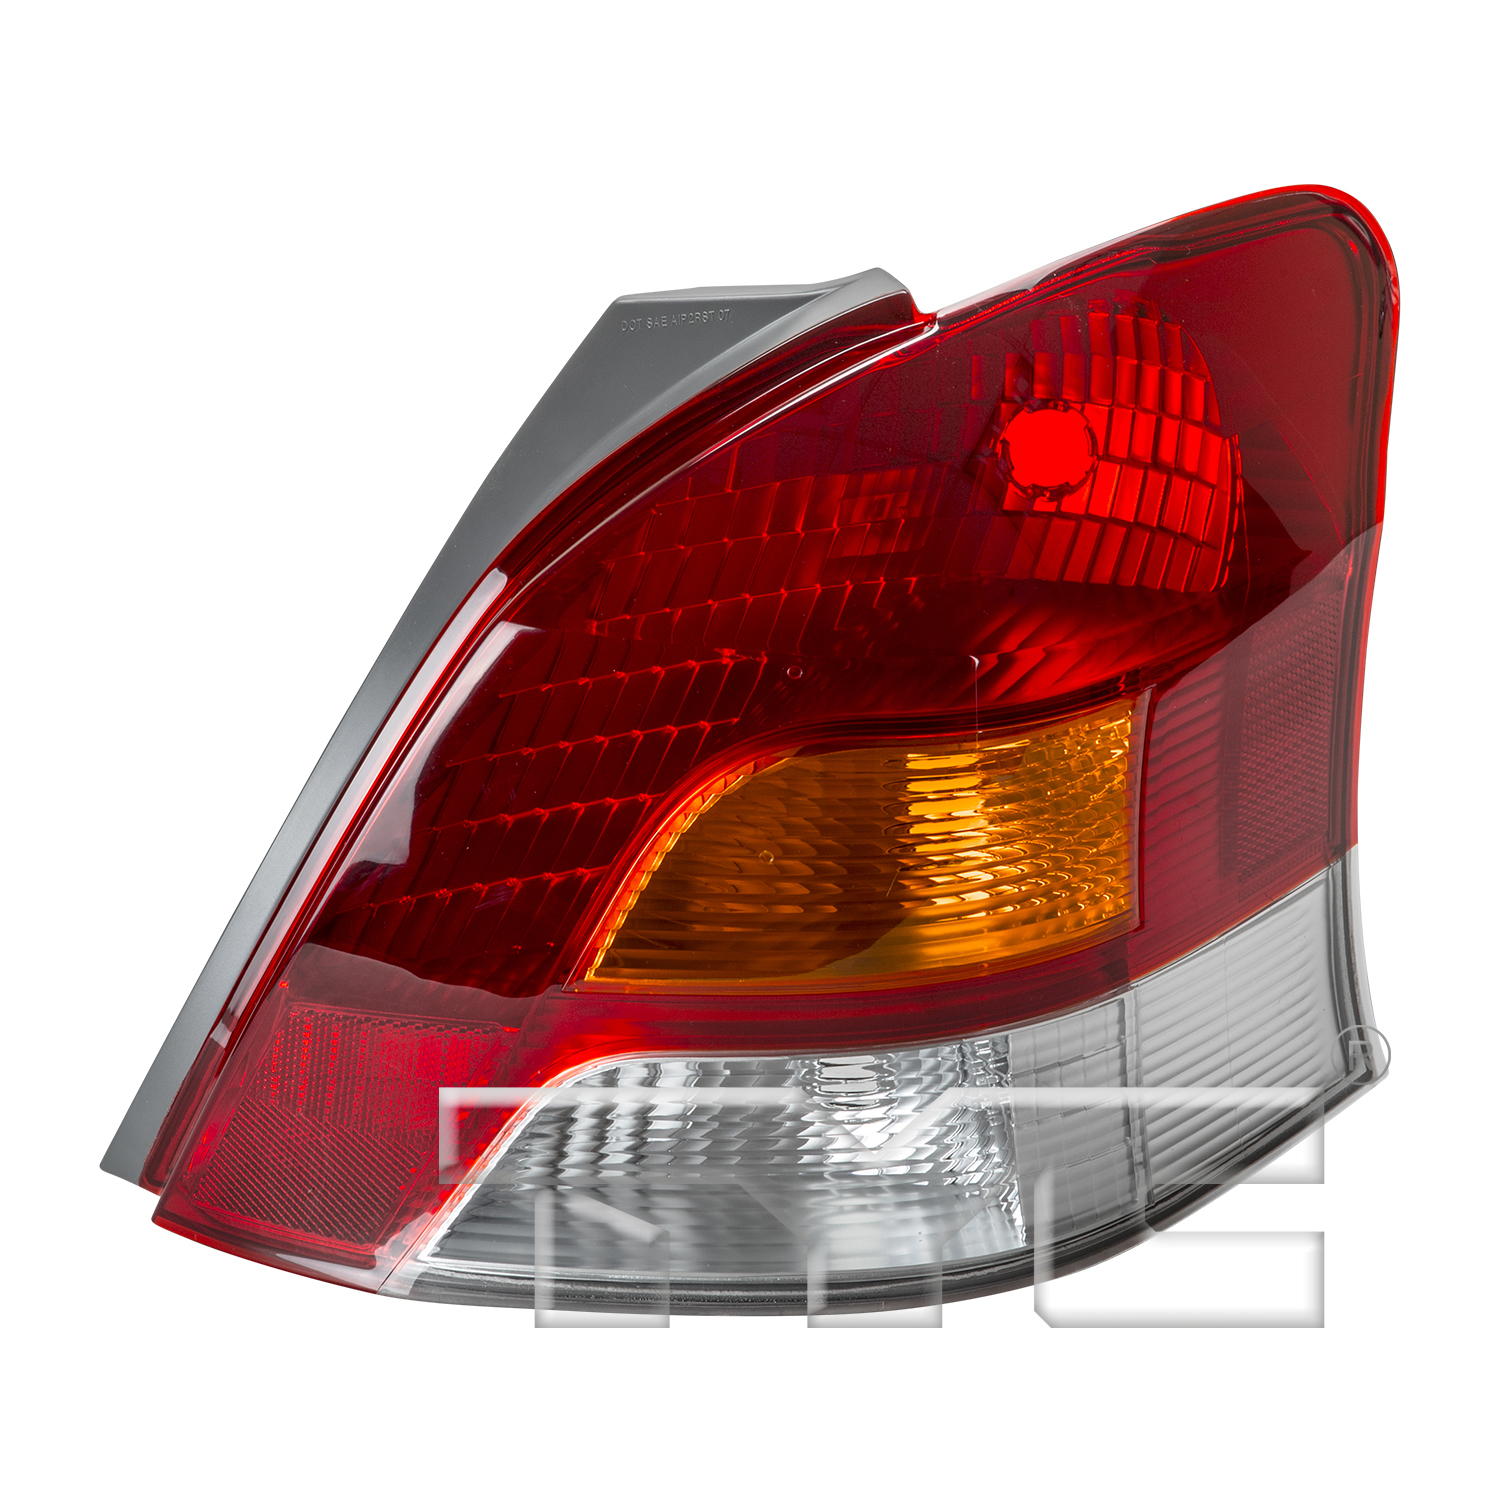 Aftermarket TAILLIGHTS for TOYOTA - YARIS, YARIS,09-11,RT Taillamp lens/housing